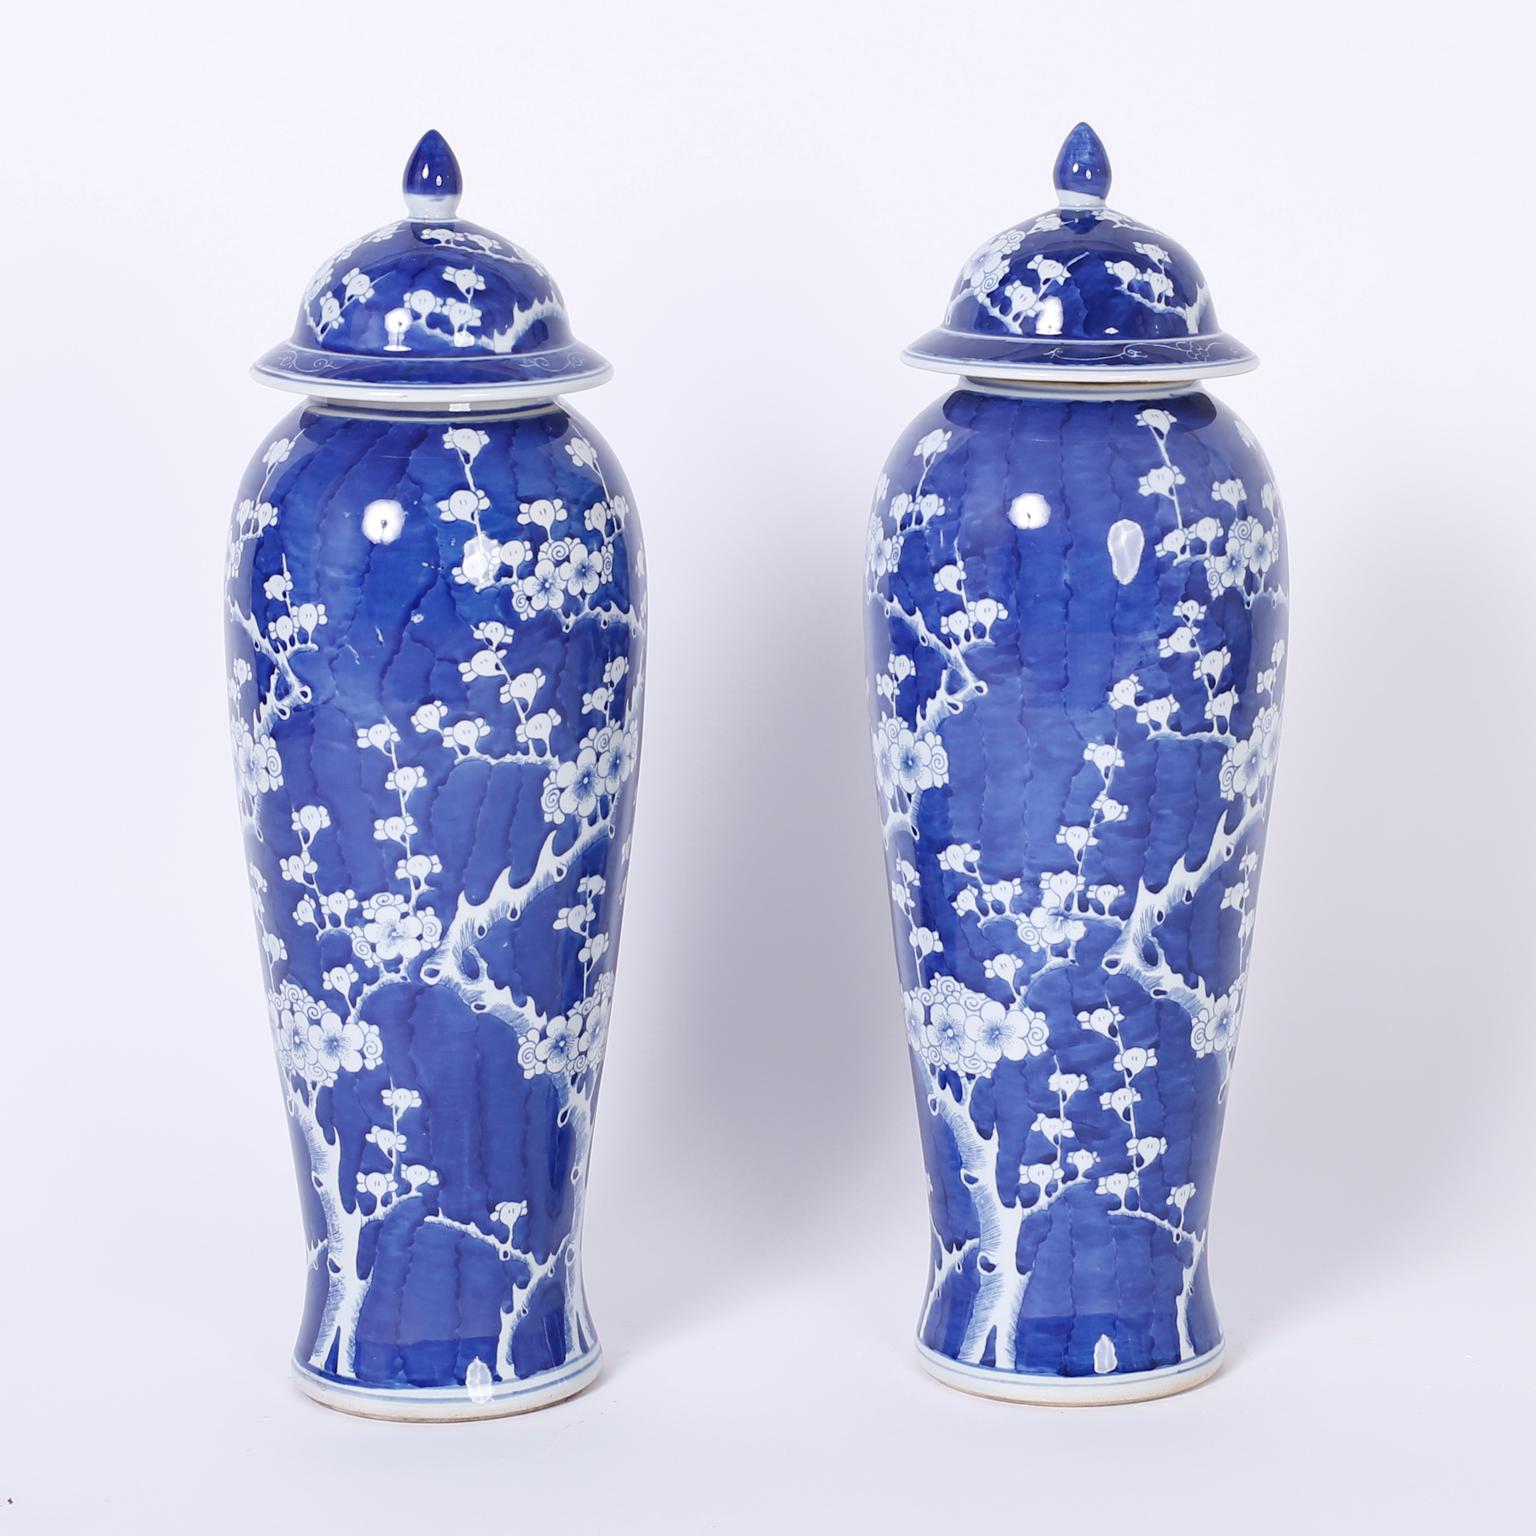 Lofty pair of lidded blue and white jars with a distinctive tall elegant form decorated with cherry blossom or prunius design, in the Chinese export manner, over an alluring deep blue background.